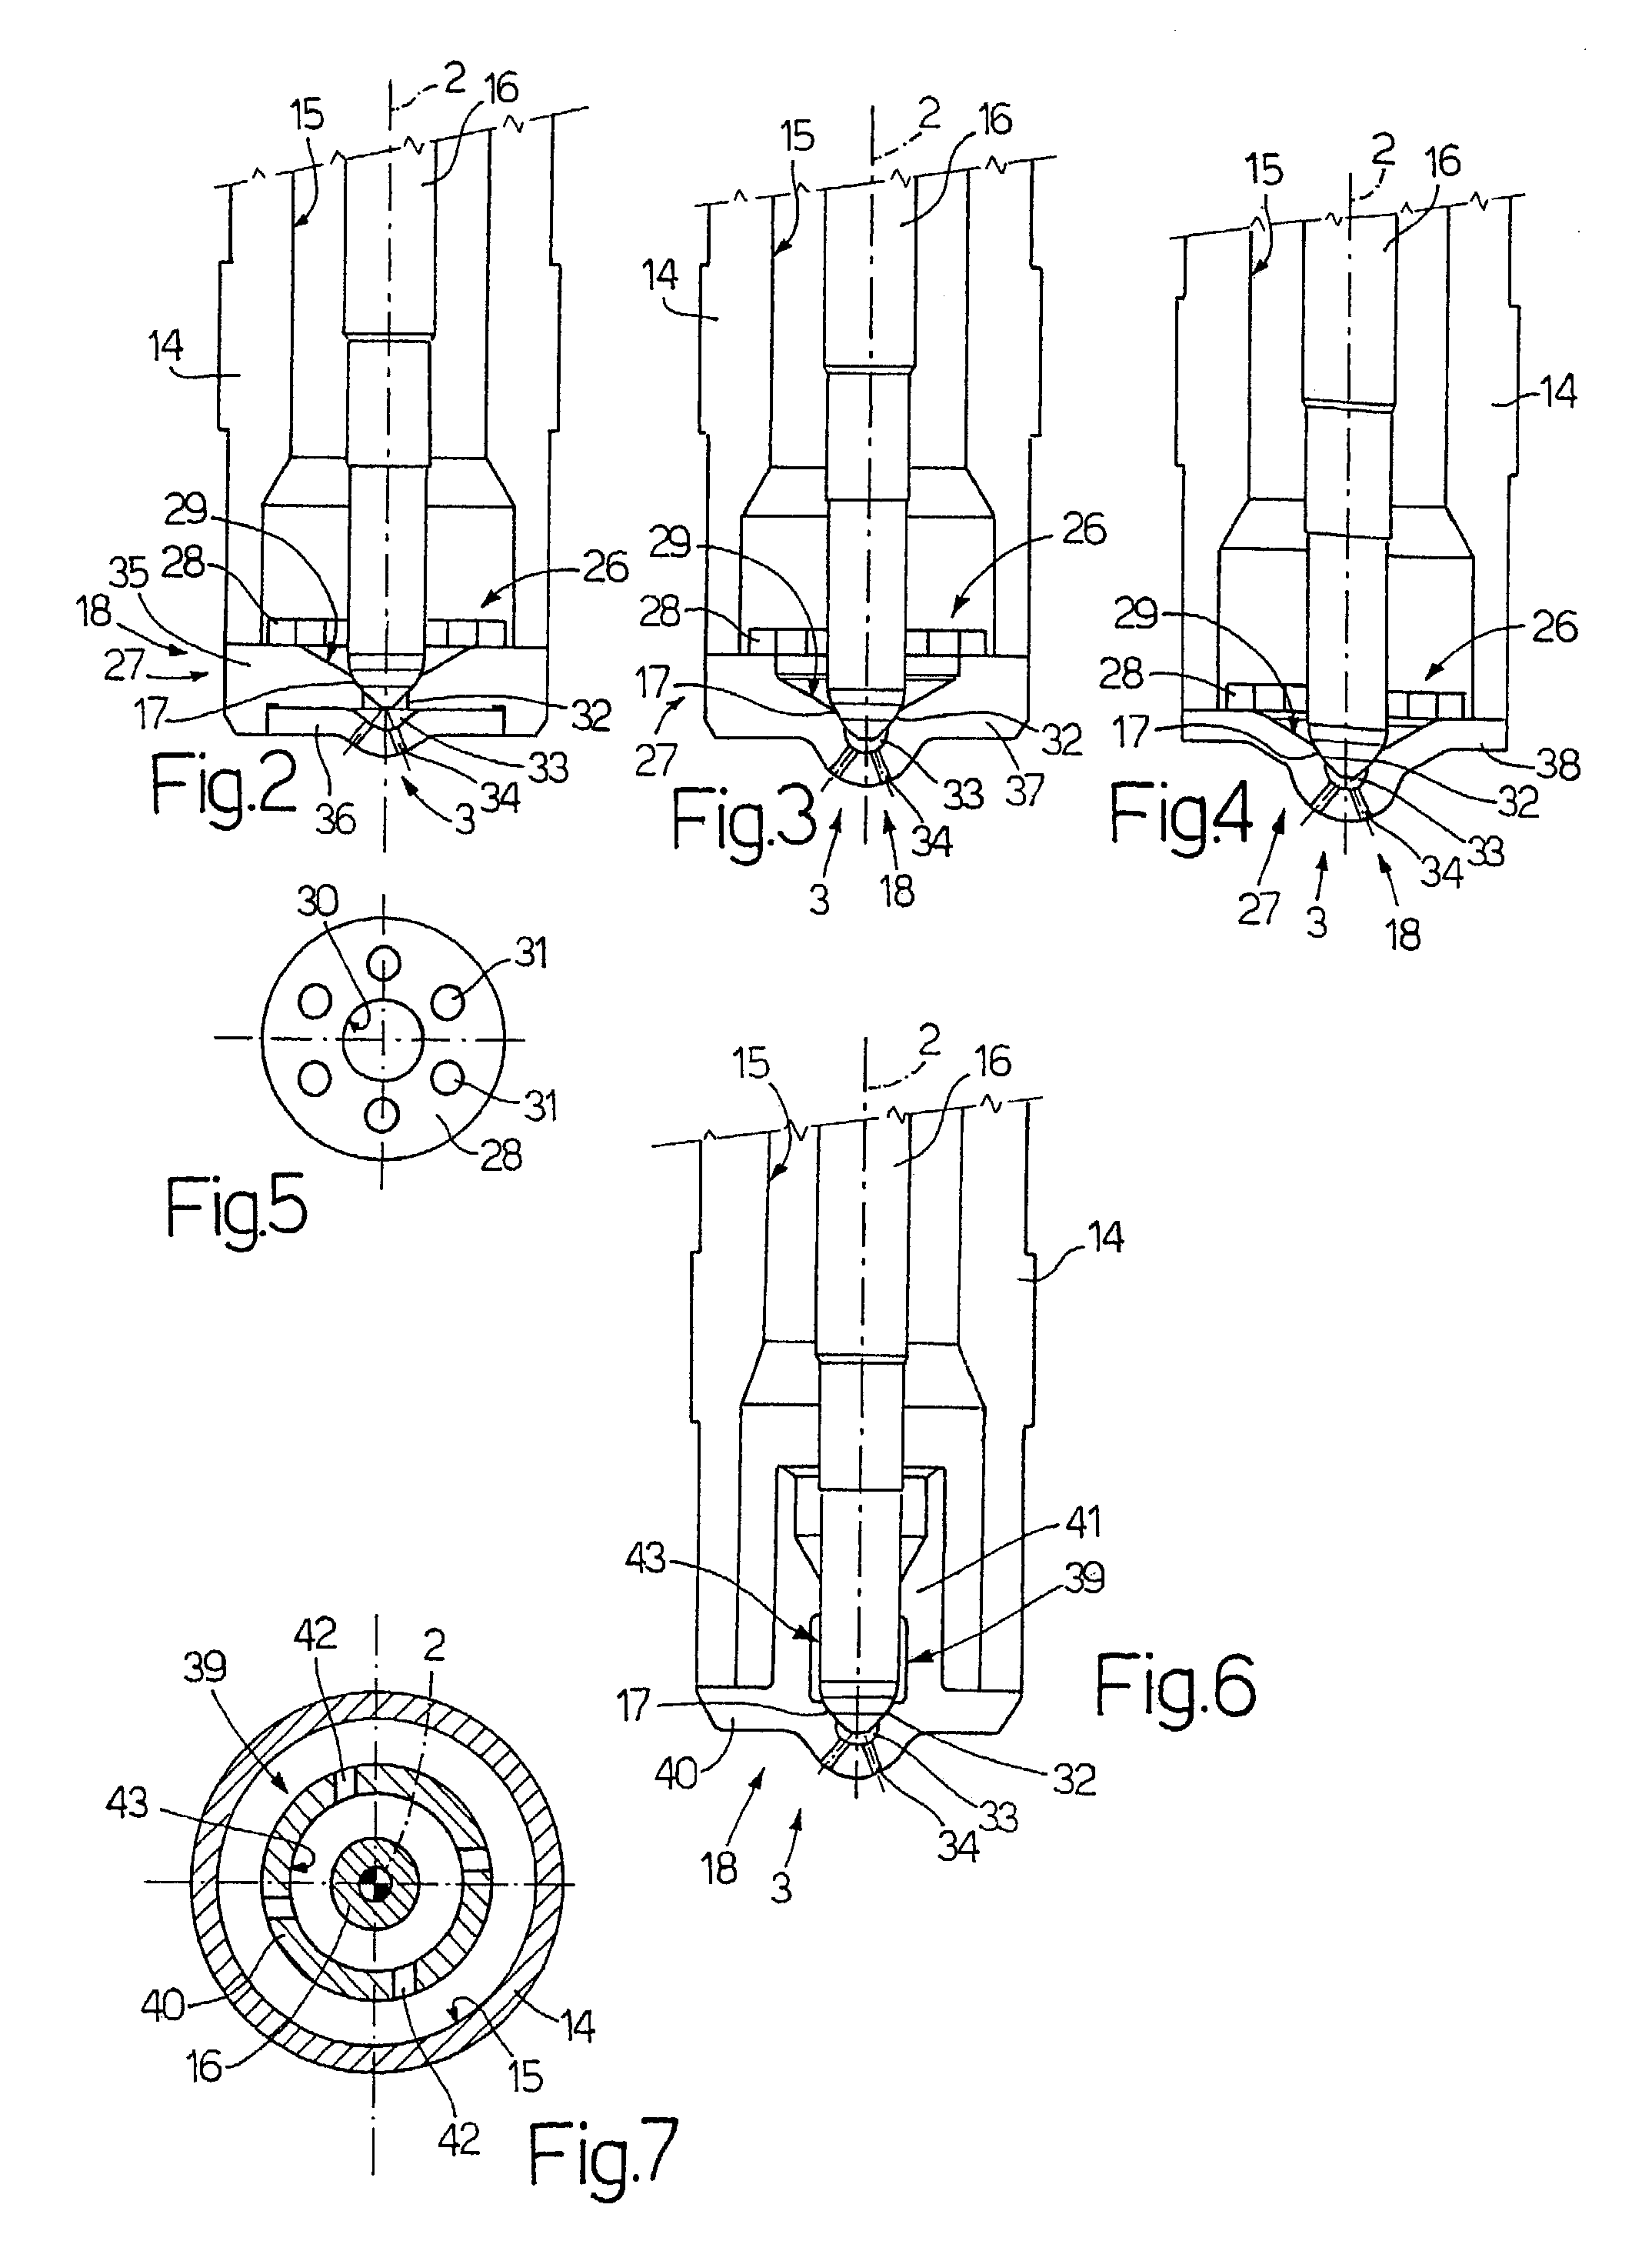 Method for controlling a fuel injector according to a control law which is differentiated as a function of injection time